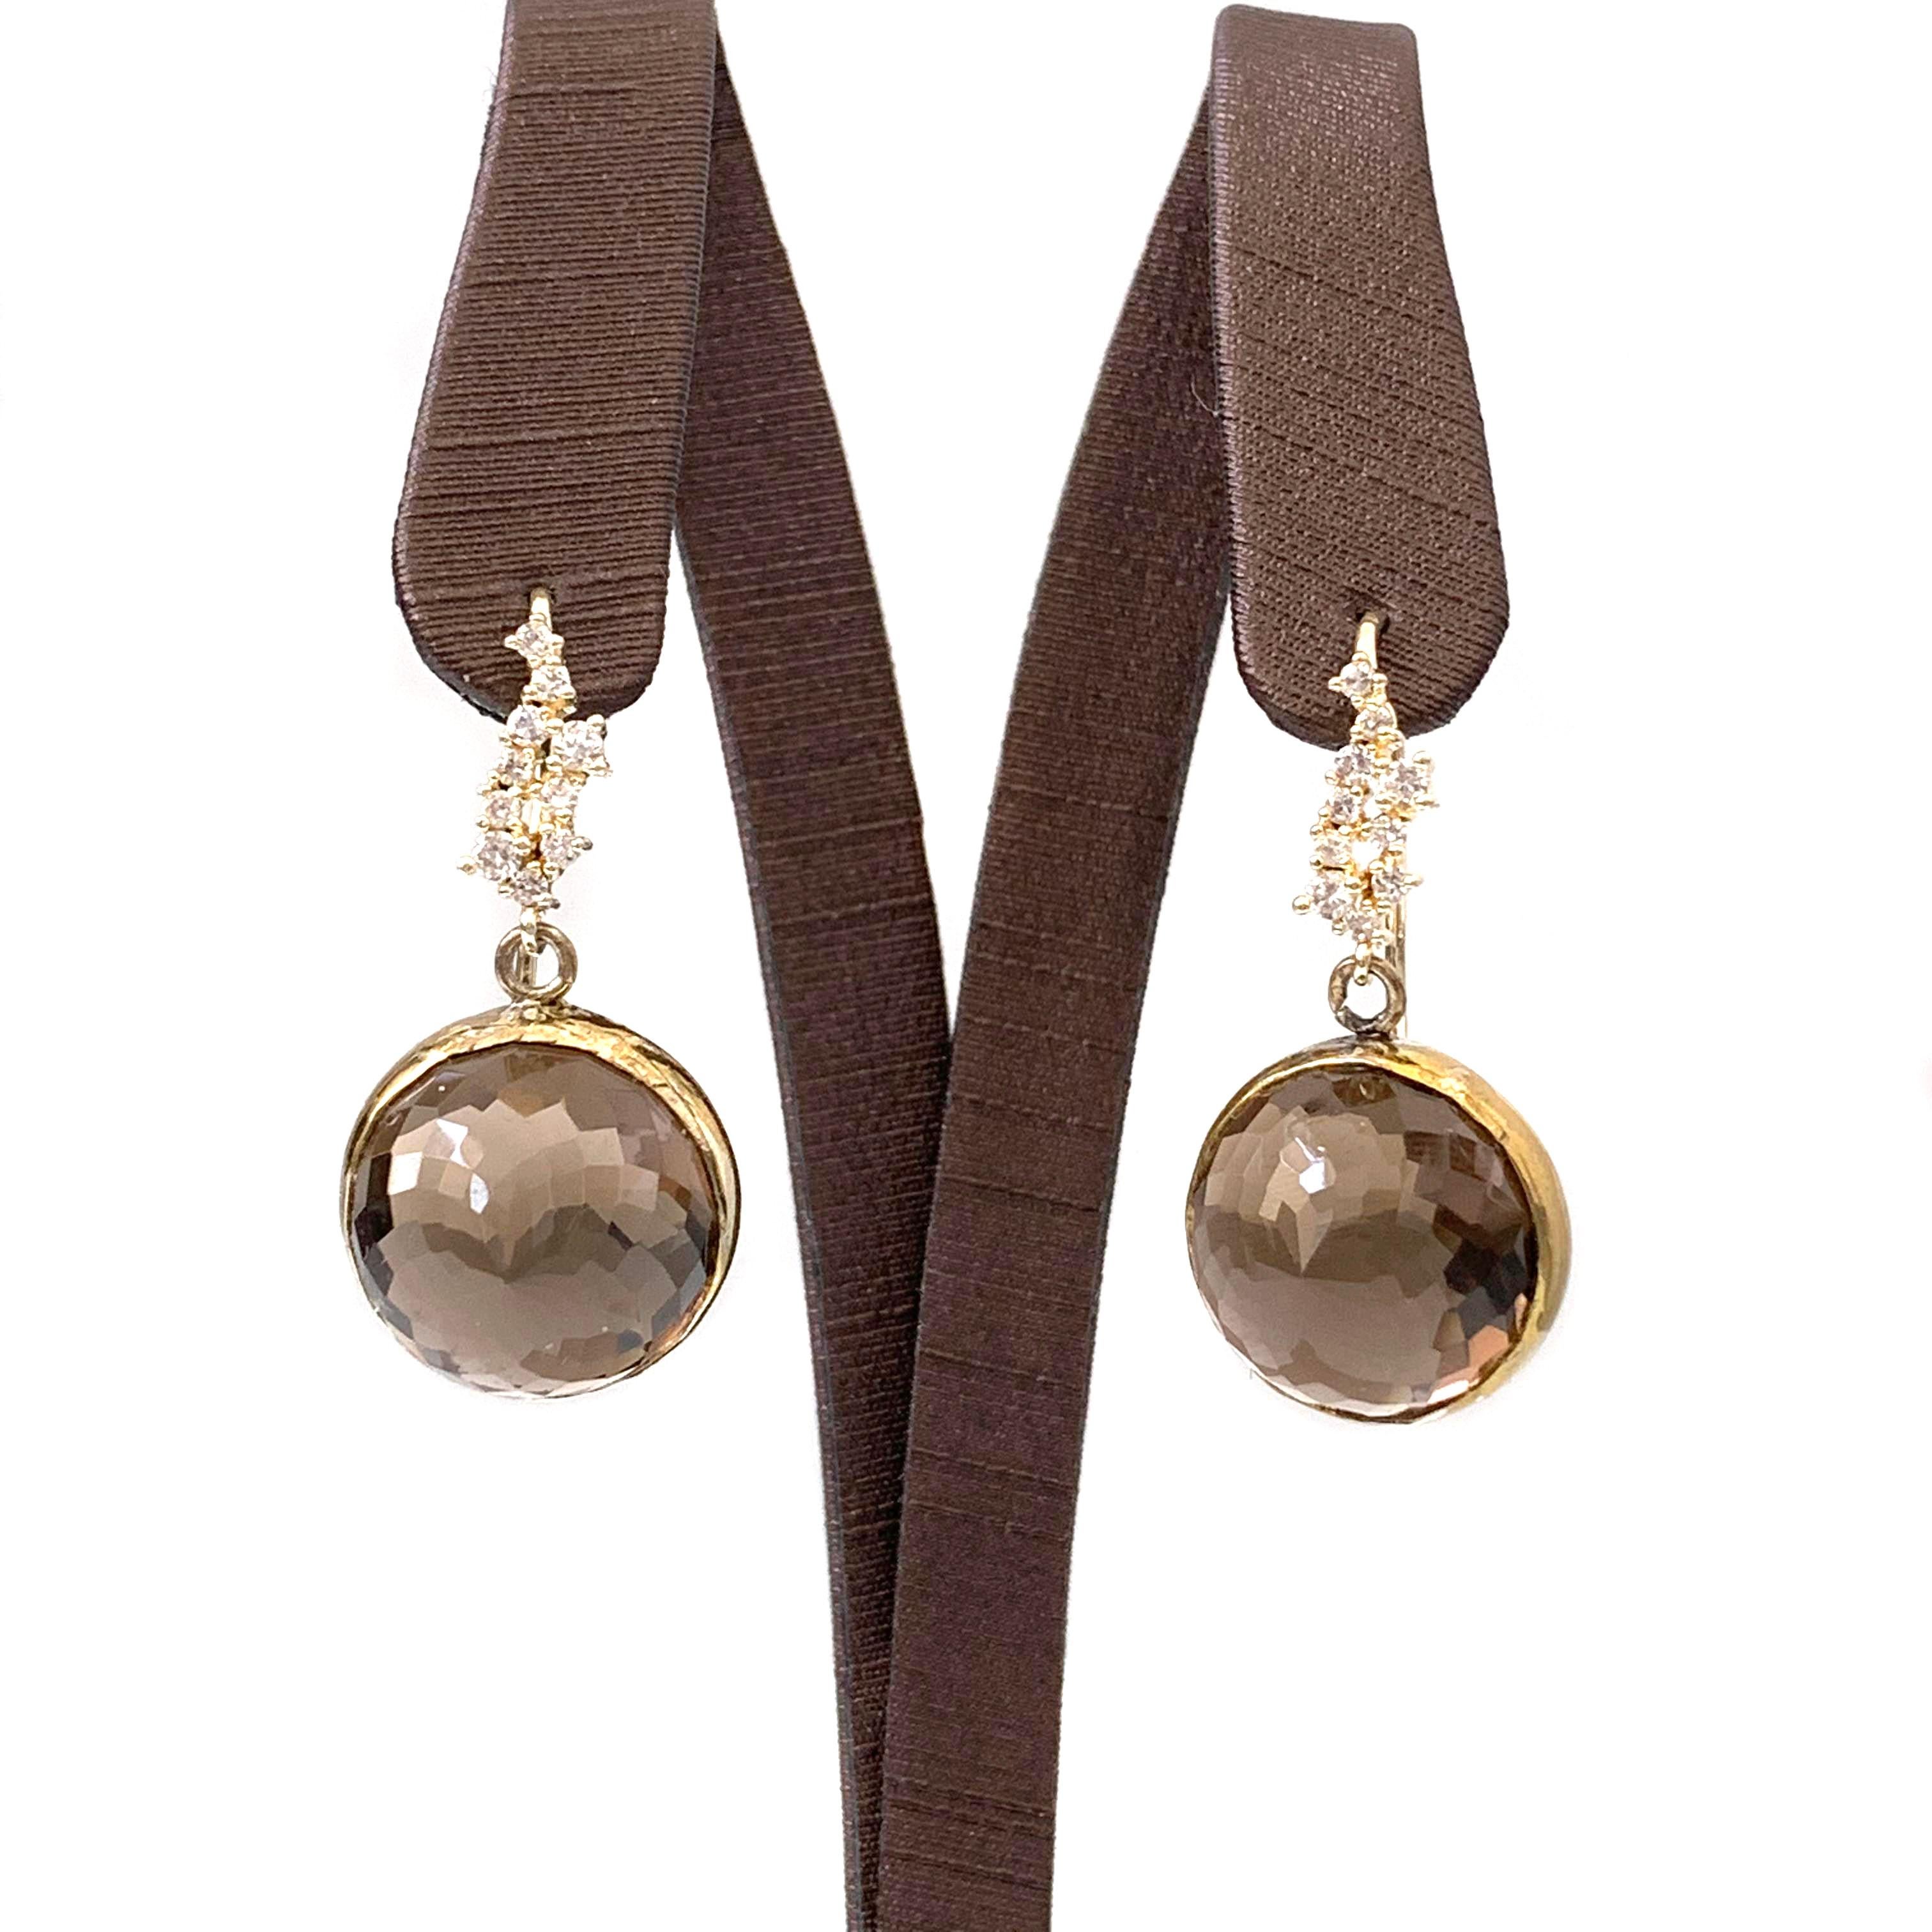 Flower pattern facet smoky quartz (15mm) vermeil hook earrings.

The earrings feature 2 beautiful 15mm round smoky quartz faceted in flower pattern, and 18k gold vermeil over sterling silver hook adorned with round faux diamond cubic zirconia.